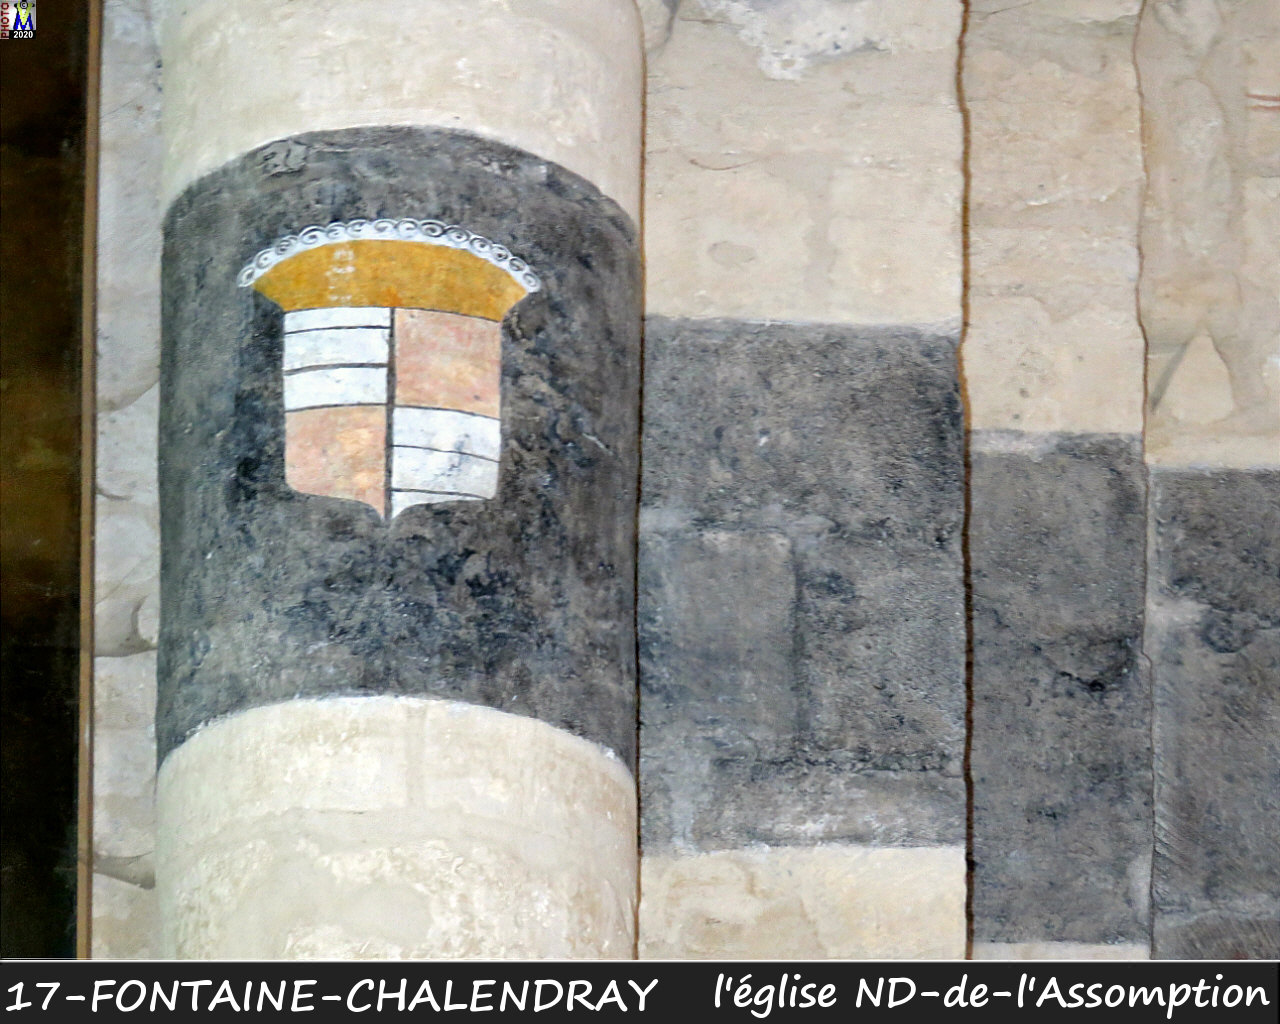 17FONTAINE-CHALENDRAY_eglise_1142.jpg